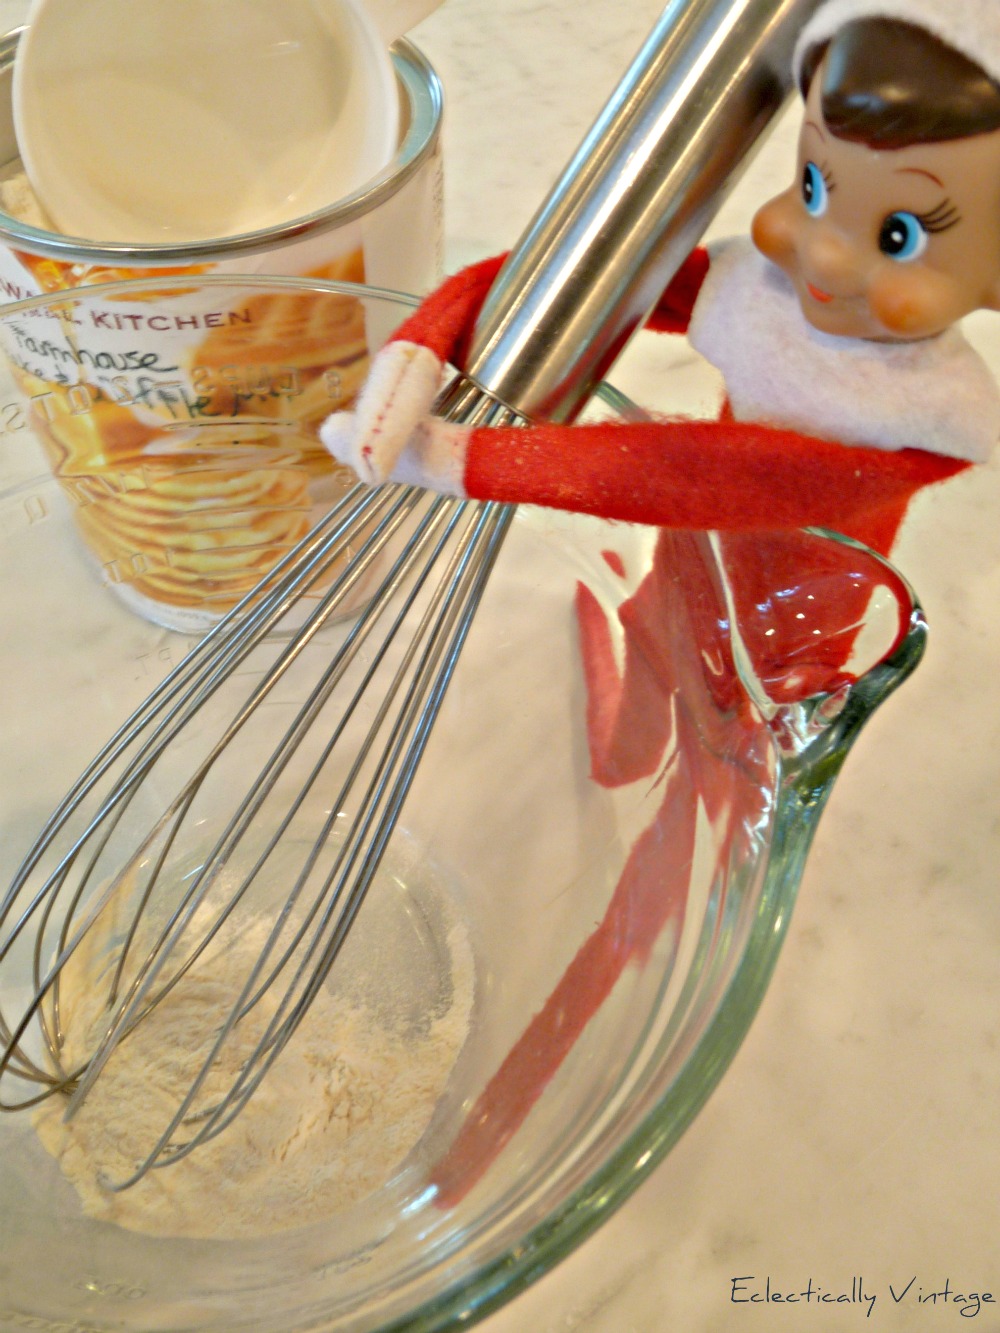 18 Hysterical Elf on the Shelf ideas! #elfontheshelf kellyelko.com This Elf on the Shelf whips up a fluffy stack of pancakes 